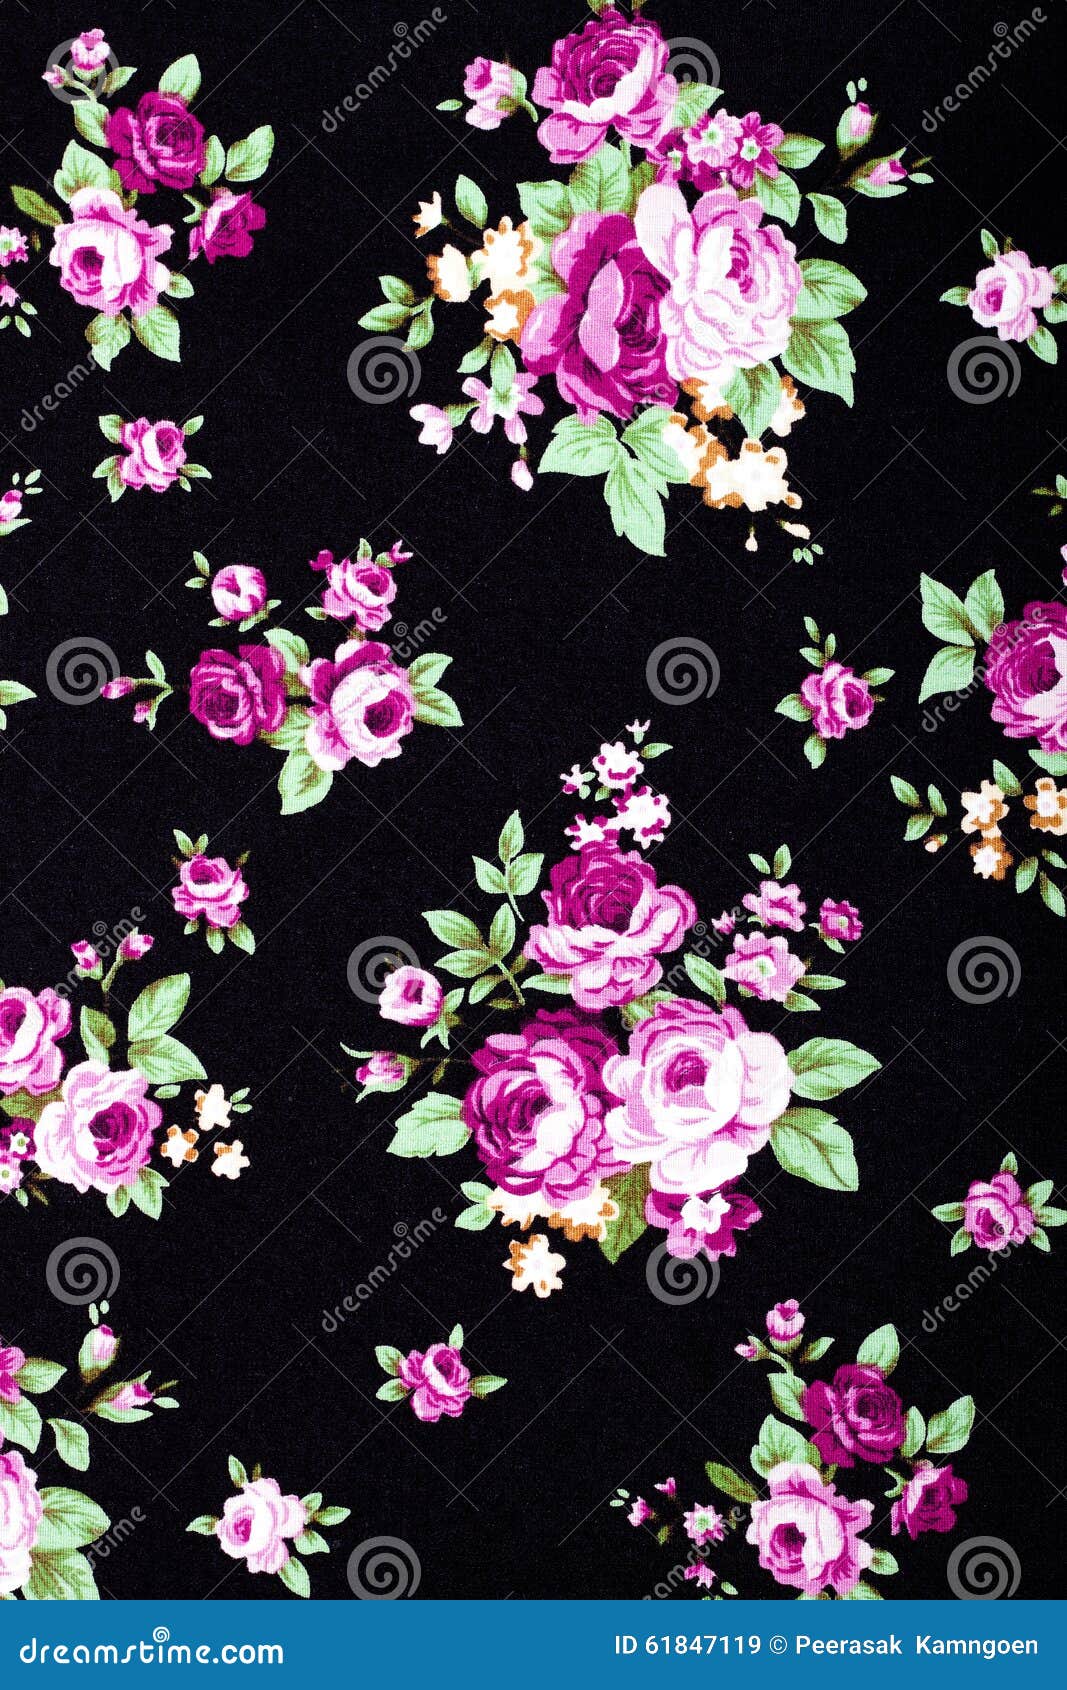 intage style of tapestry flowers fabric pattern